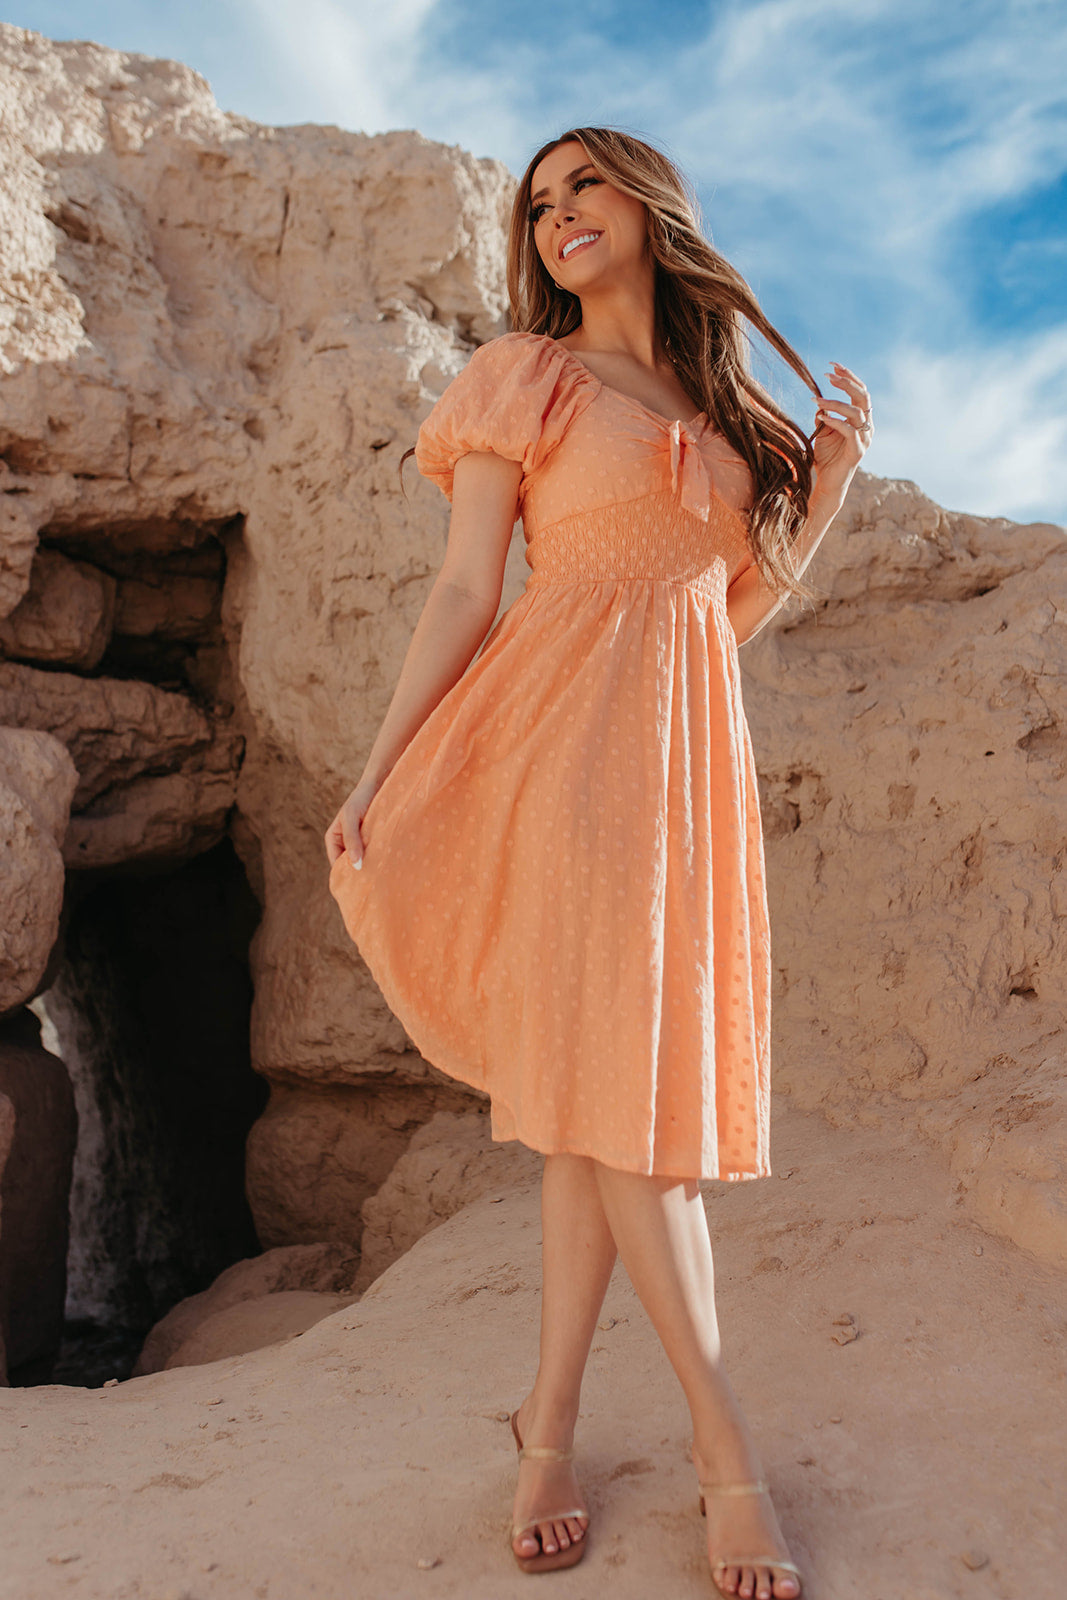 THE PAISLEY TIE FRONT SWISS DAISY DRESS IN PEACHY PEACH BY PINK DESERT